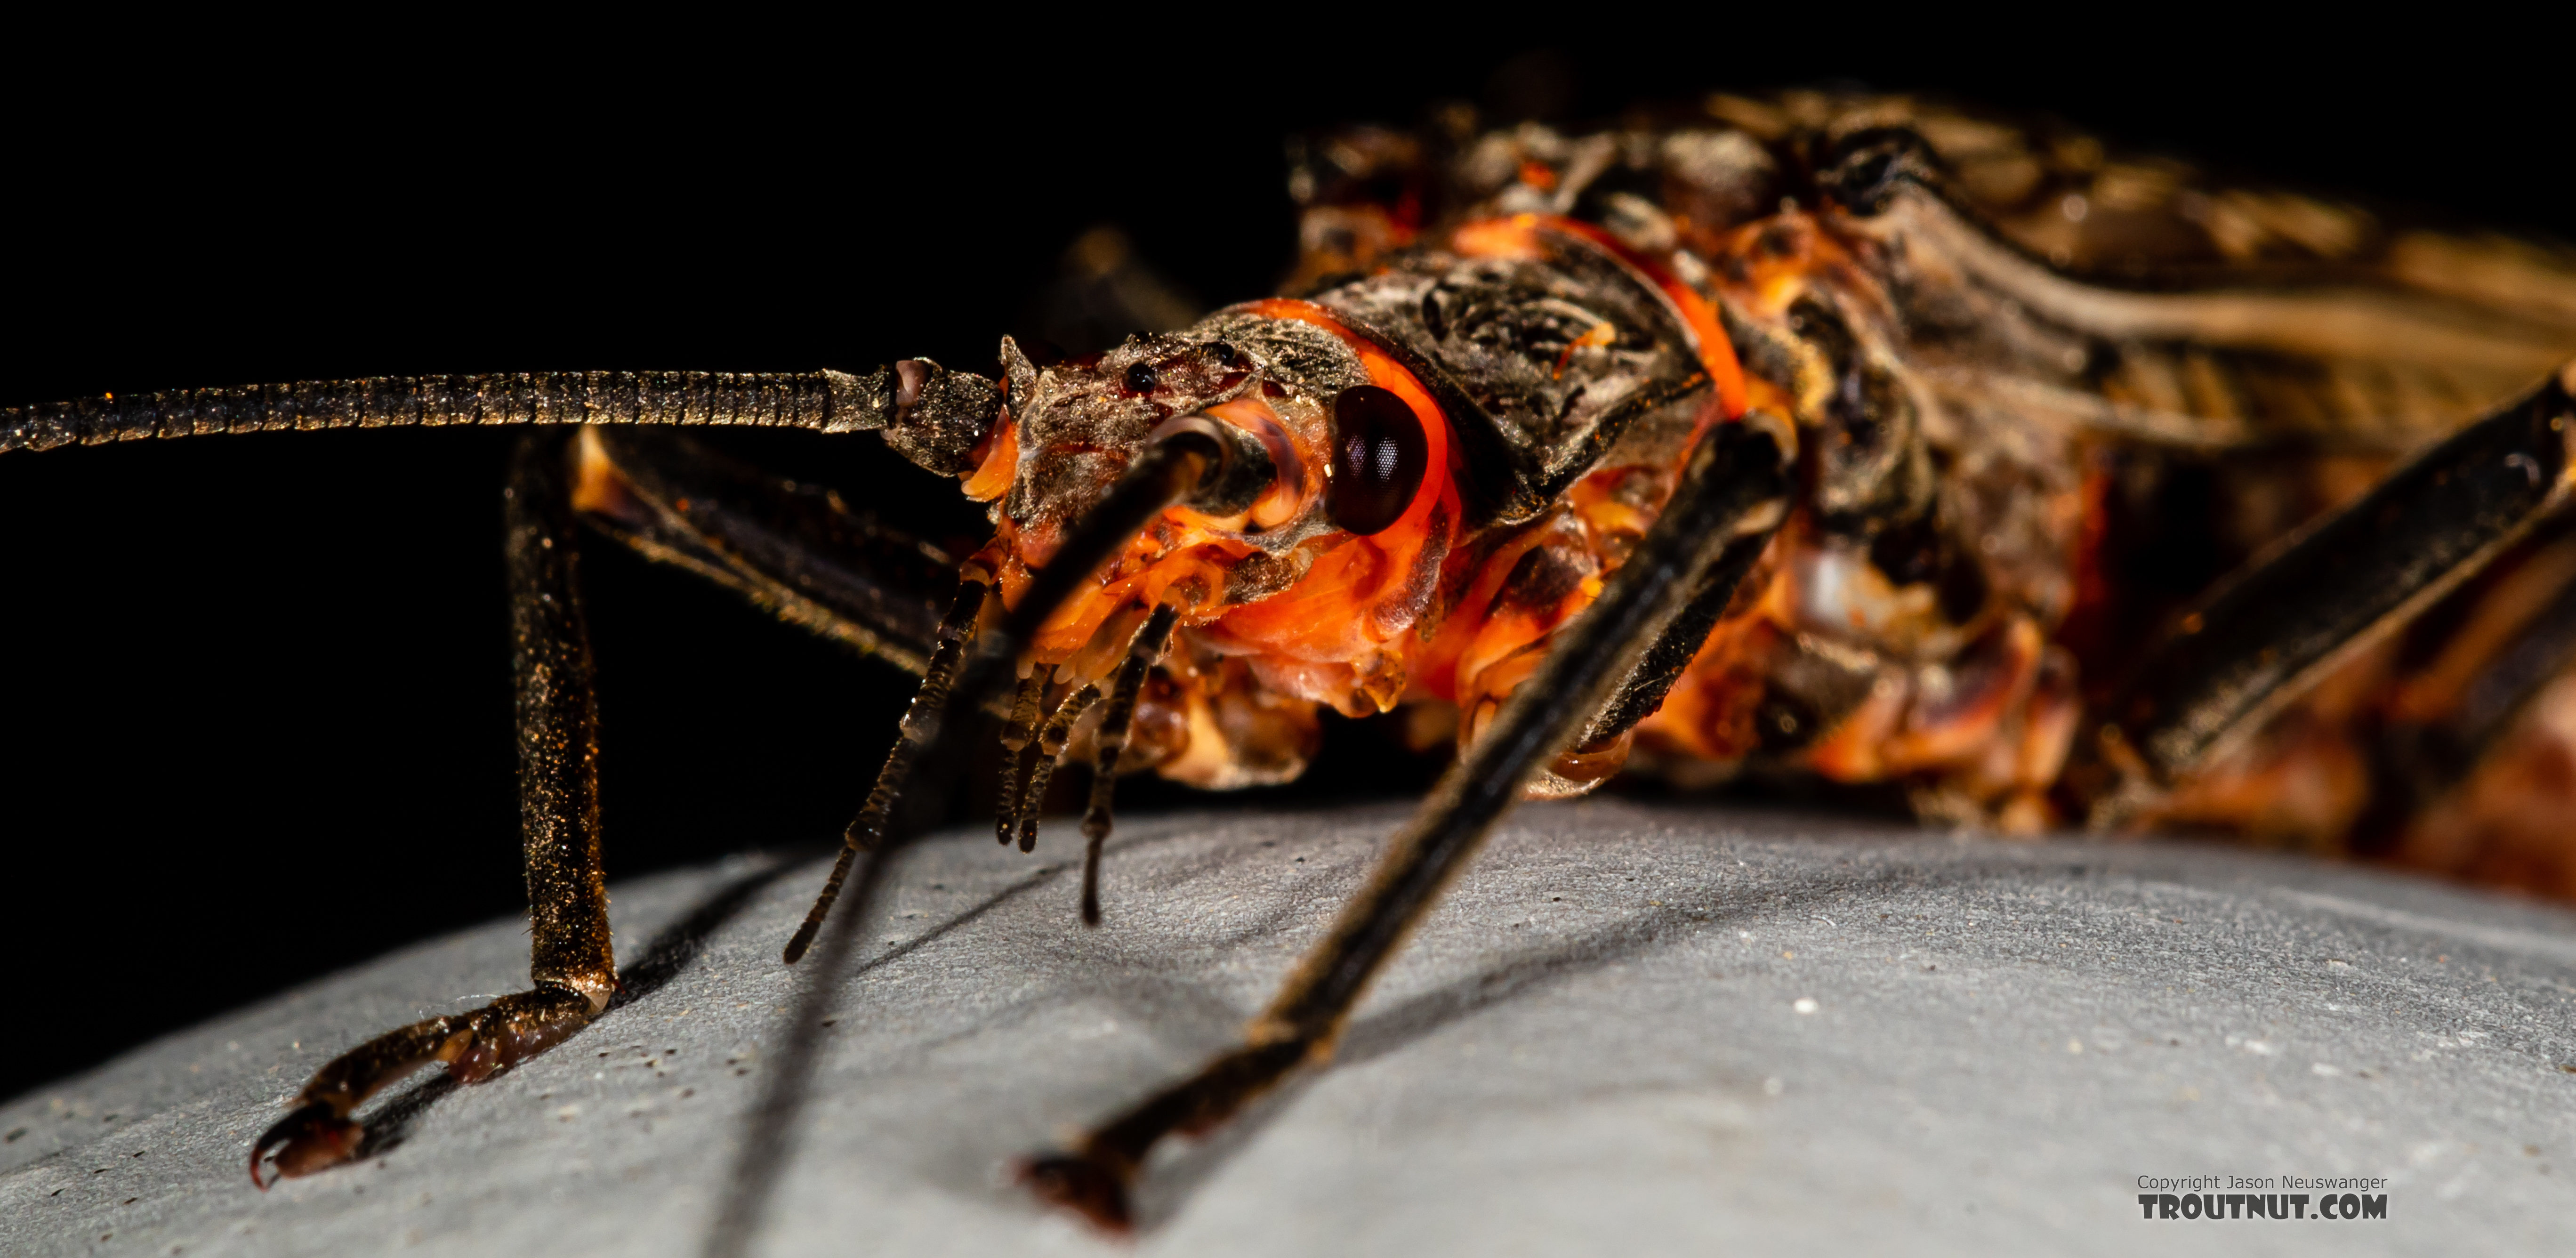 Male Pteronarcys californica (Giant Salmonfly) Stonefly Adult from the Gallatin River in Montana